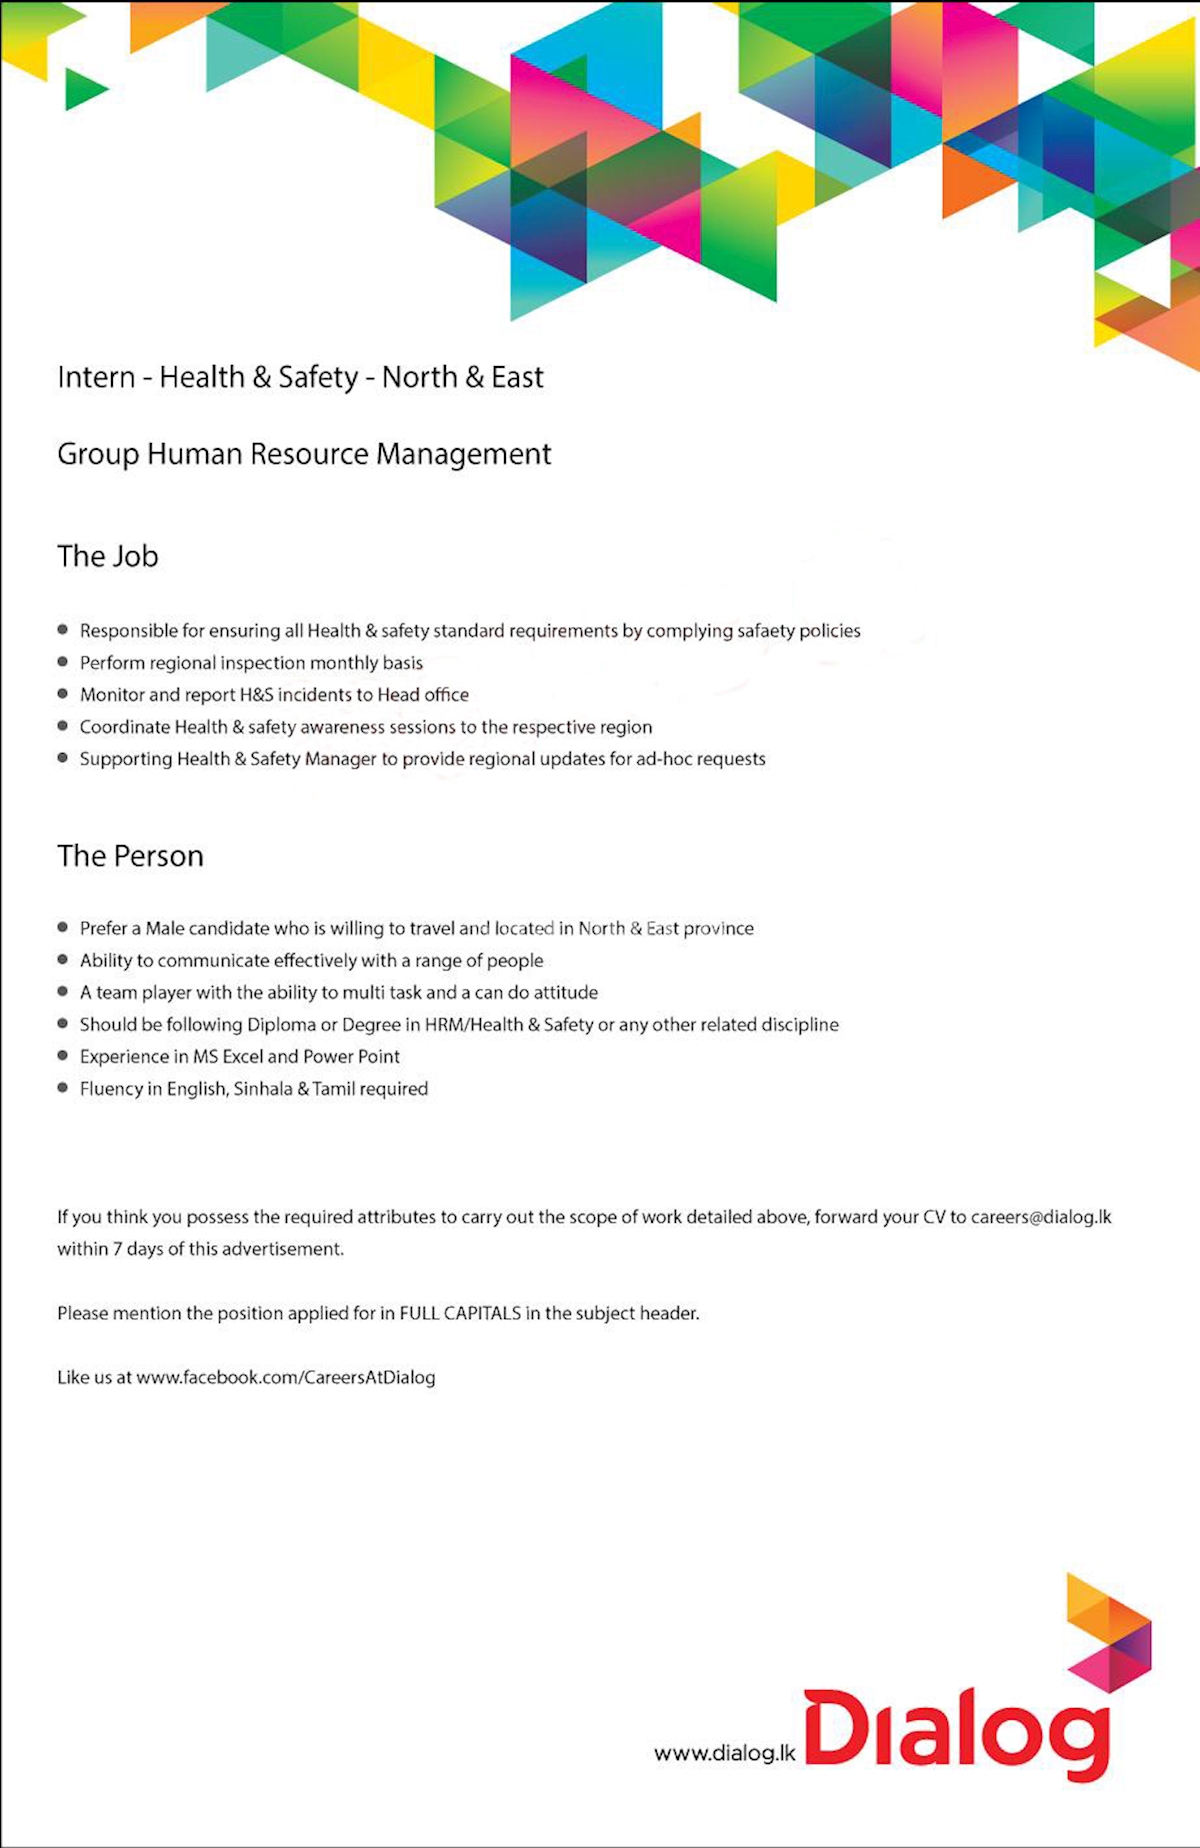 Intern - Health and Safety - North and East